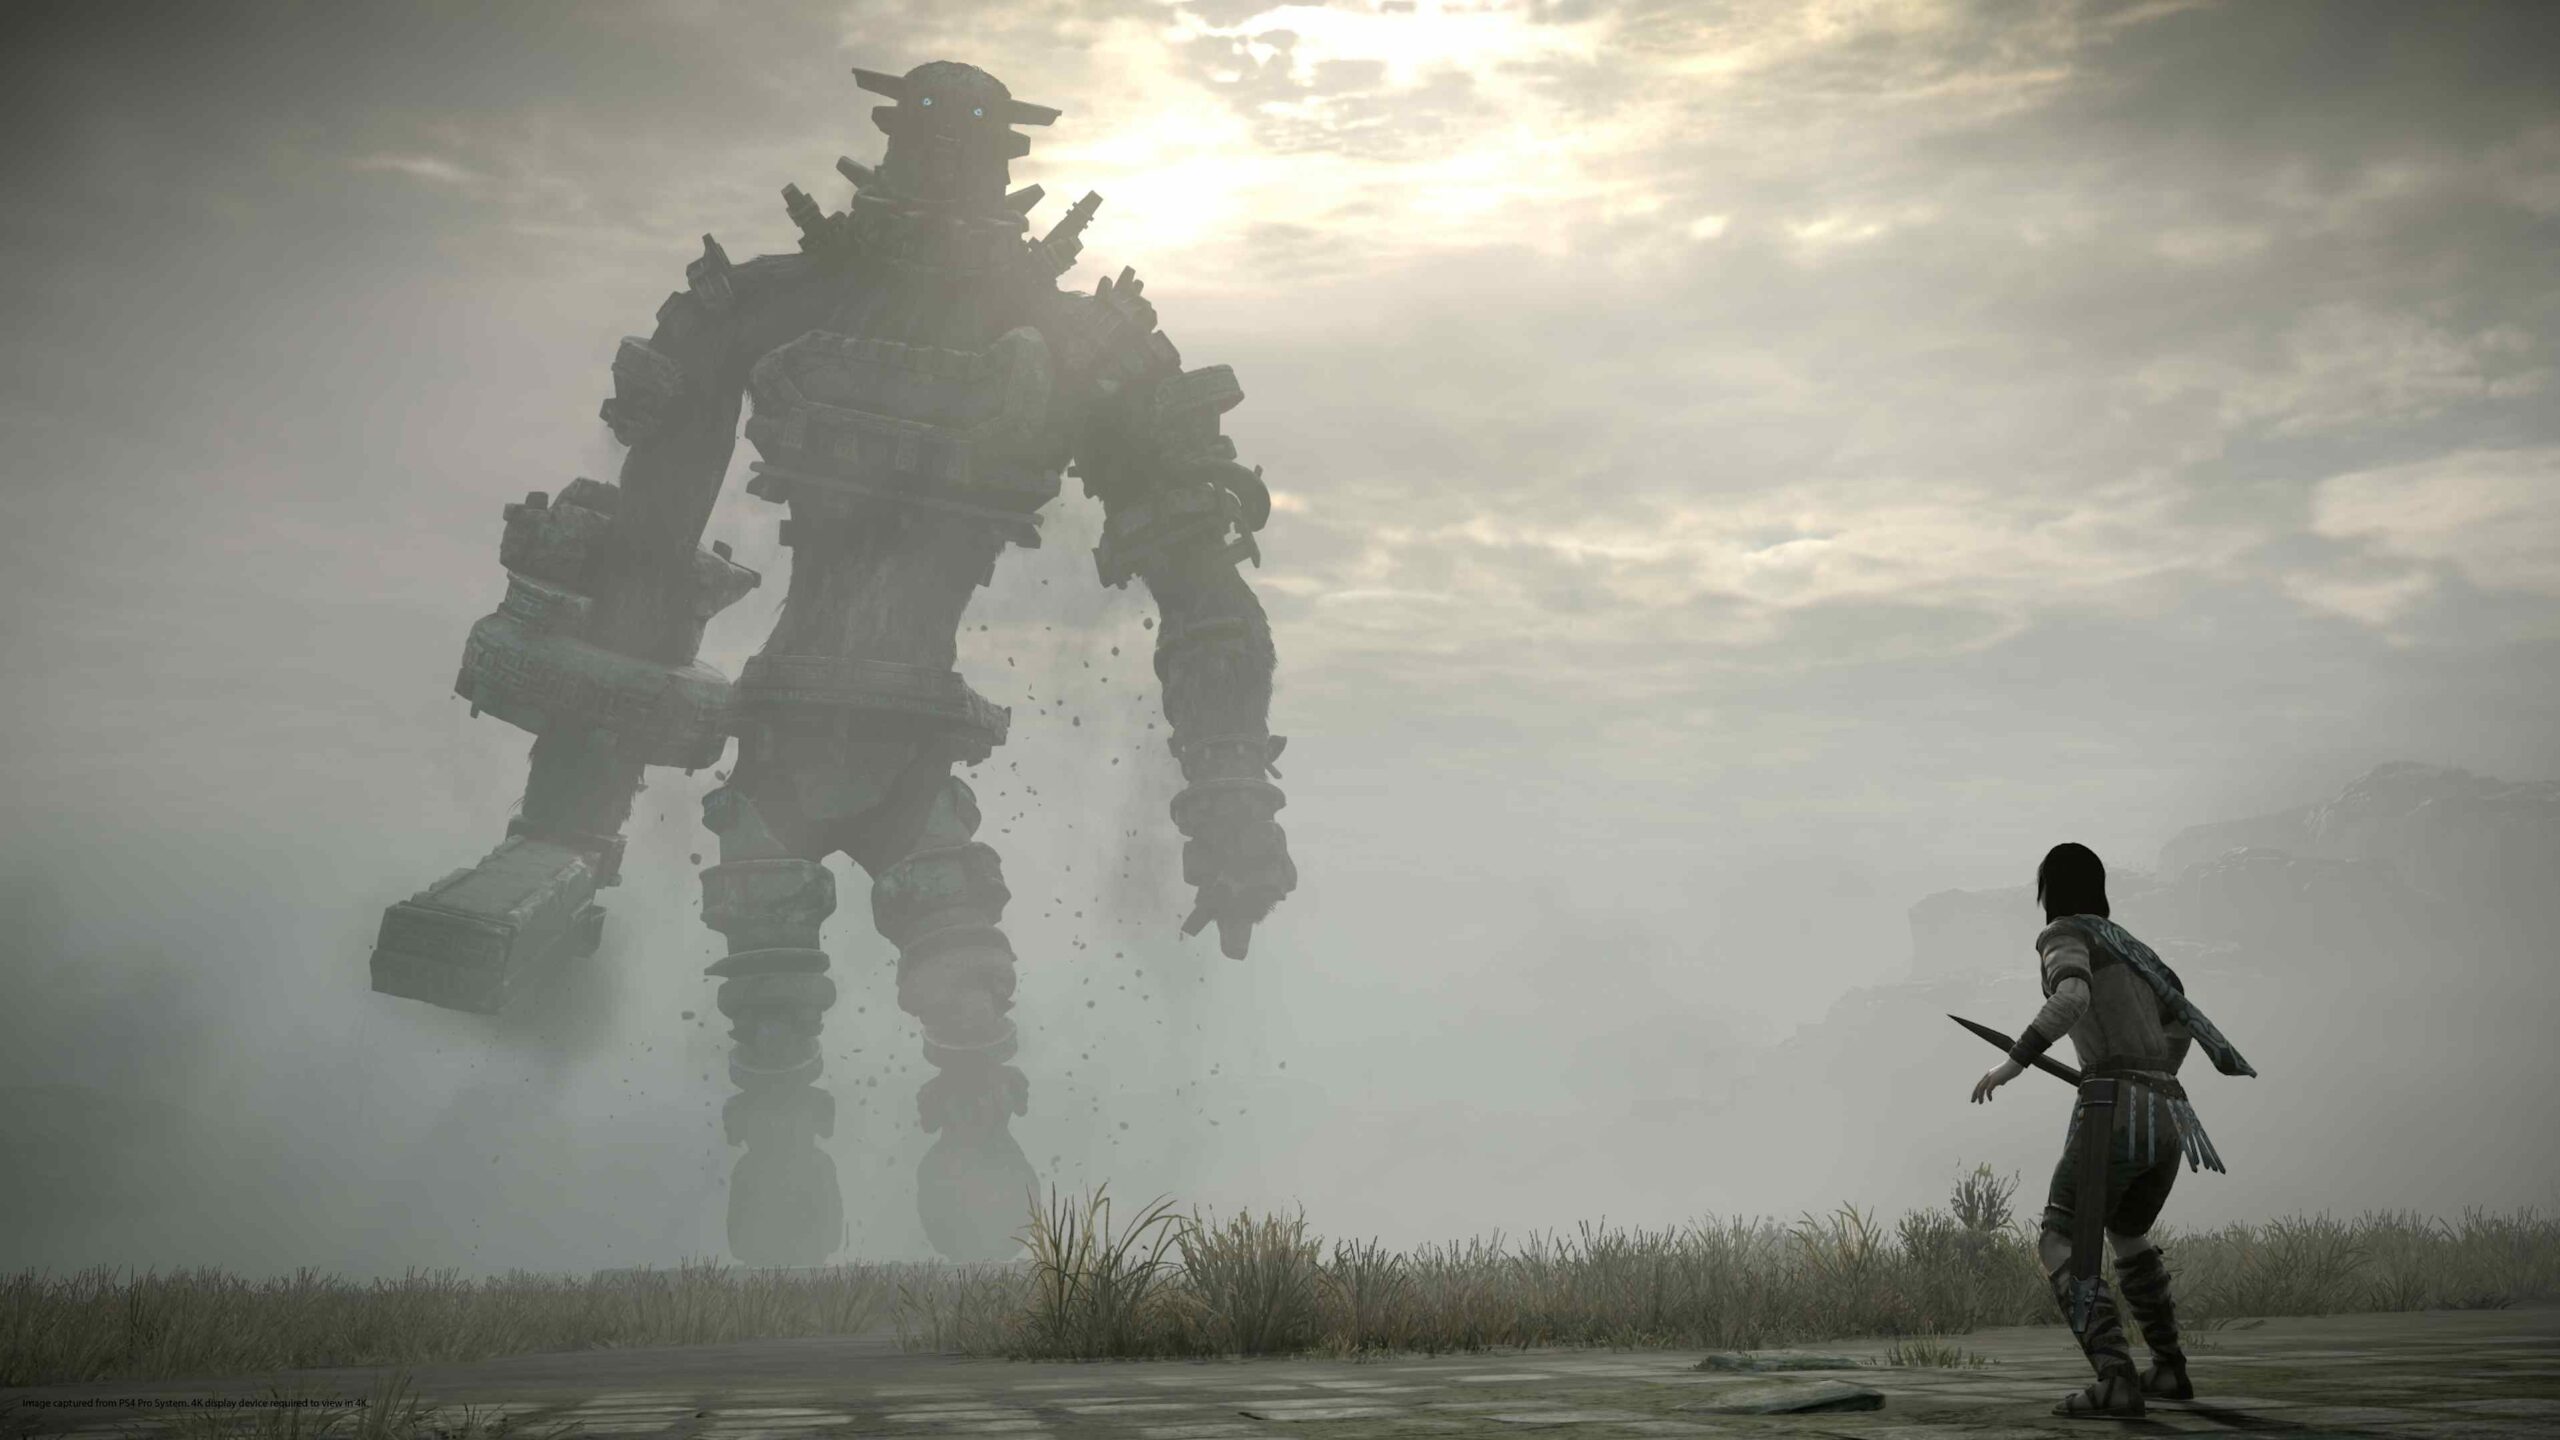 Team Ico made Shadow of the Colossus, an action-adventure game that Sony Computer Entertainment released.